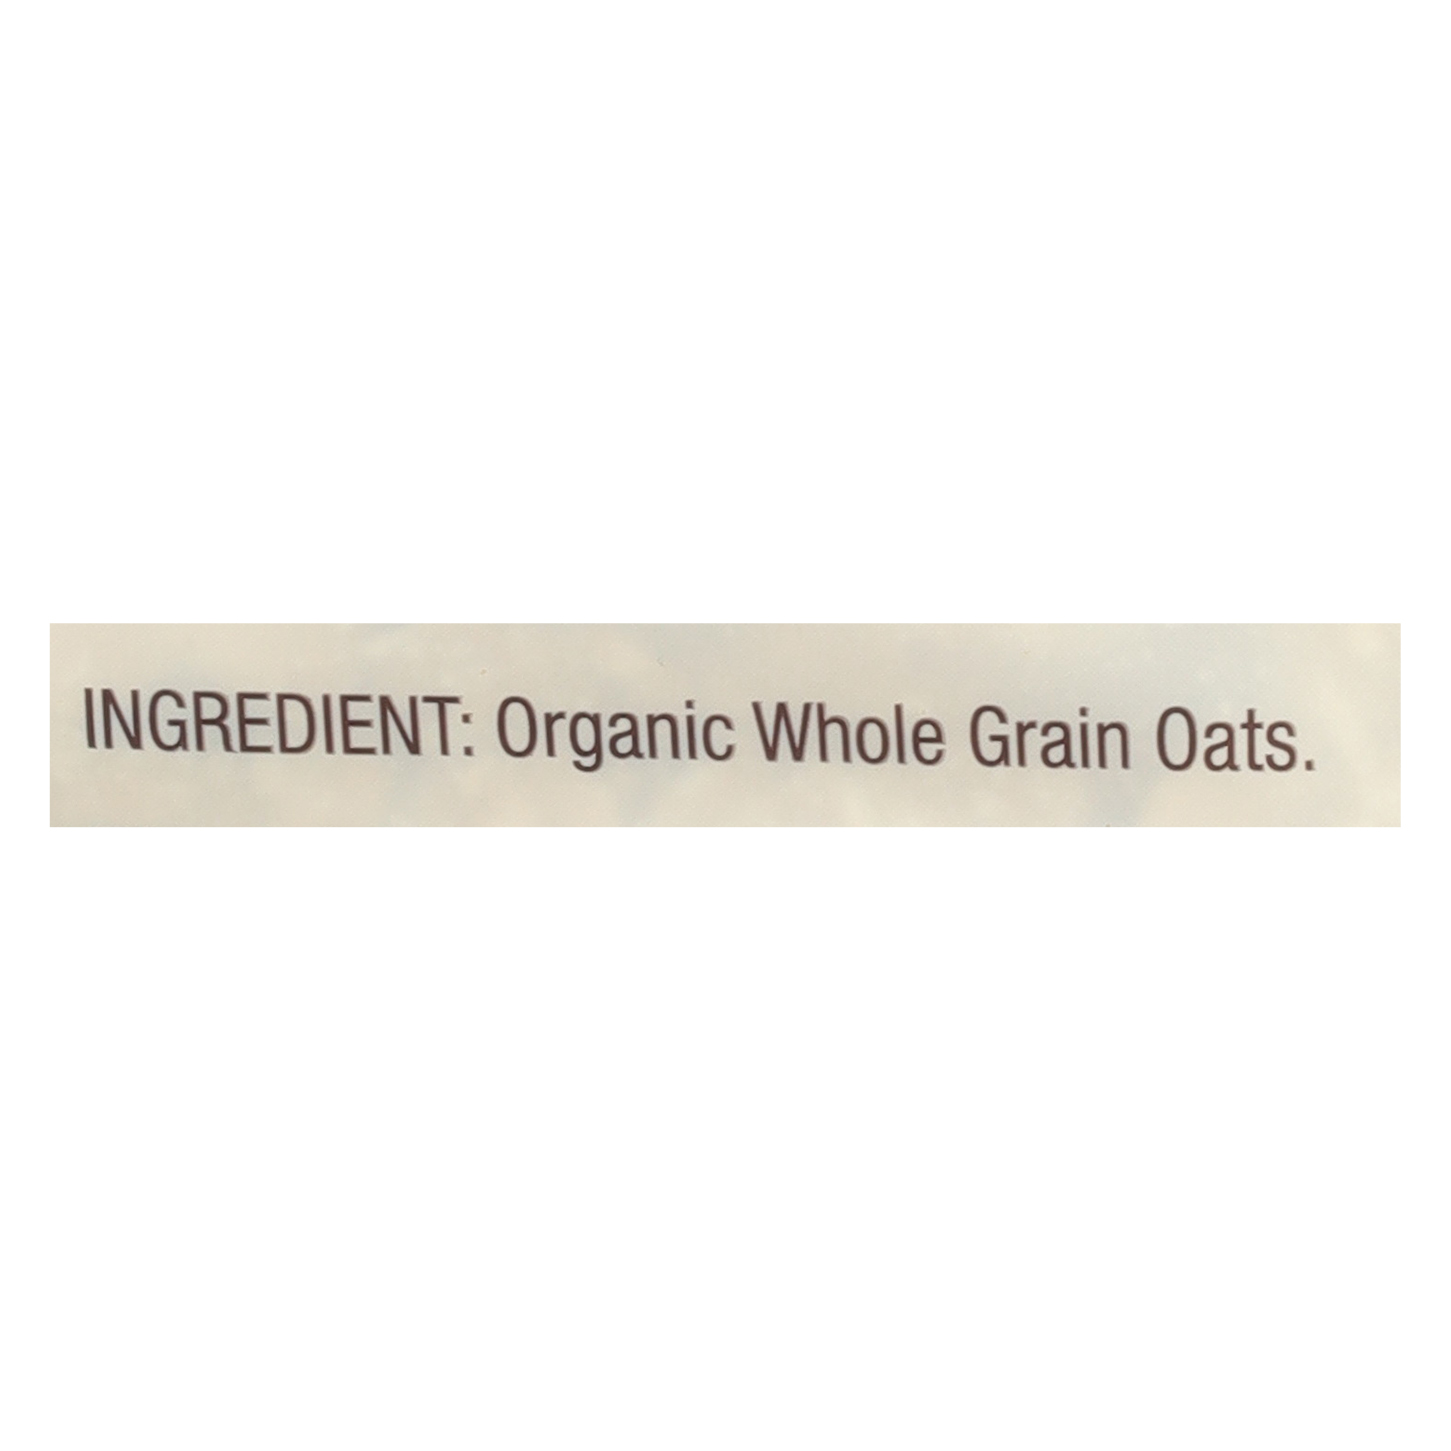 Bob's Red Mill Non-GMO Organic Old Fashioned Rolled Oats 32 oz Bag - image 3 of 5